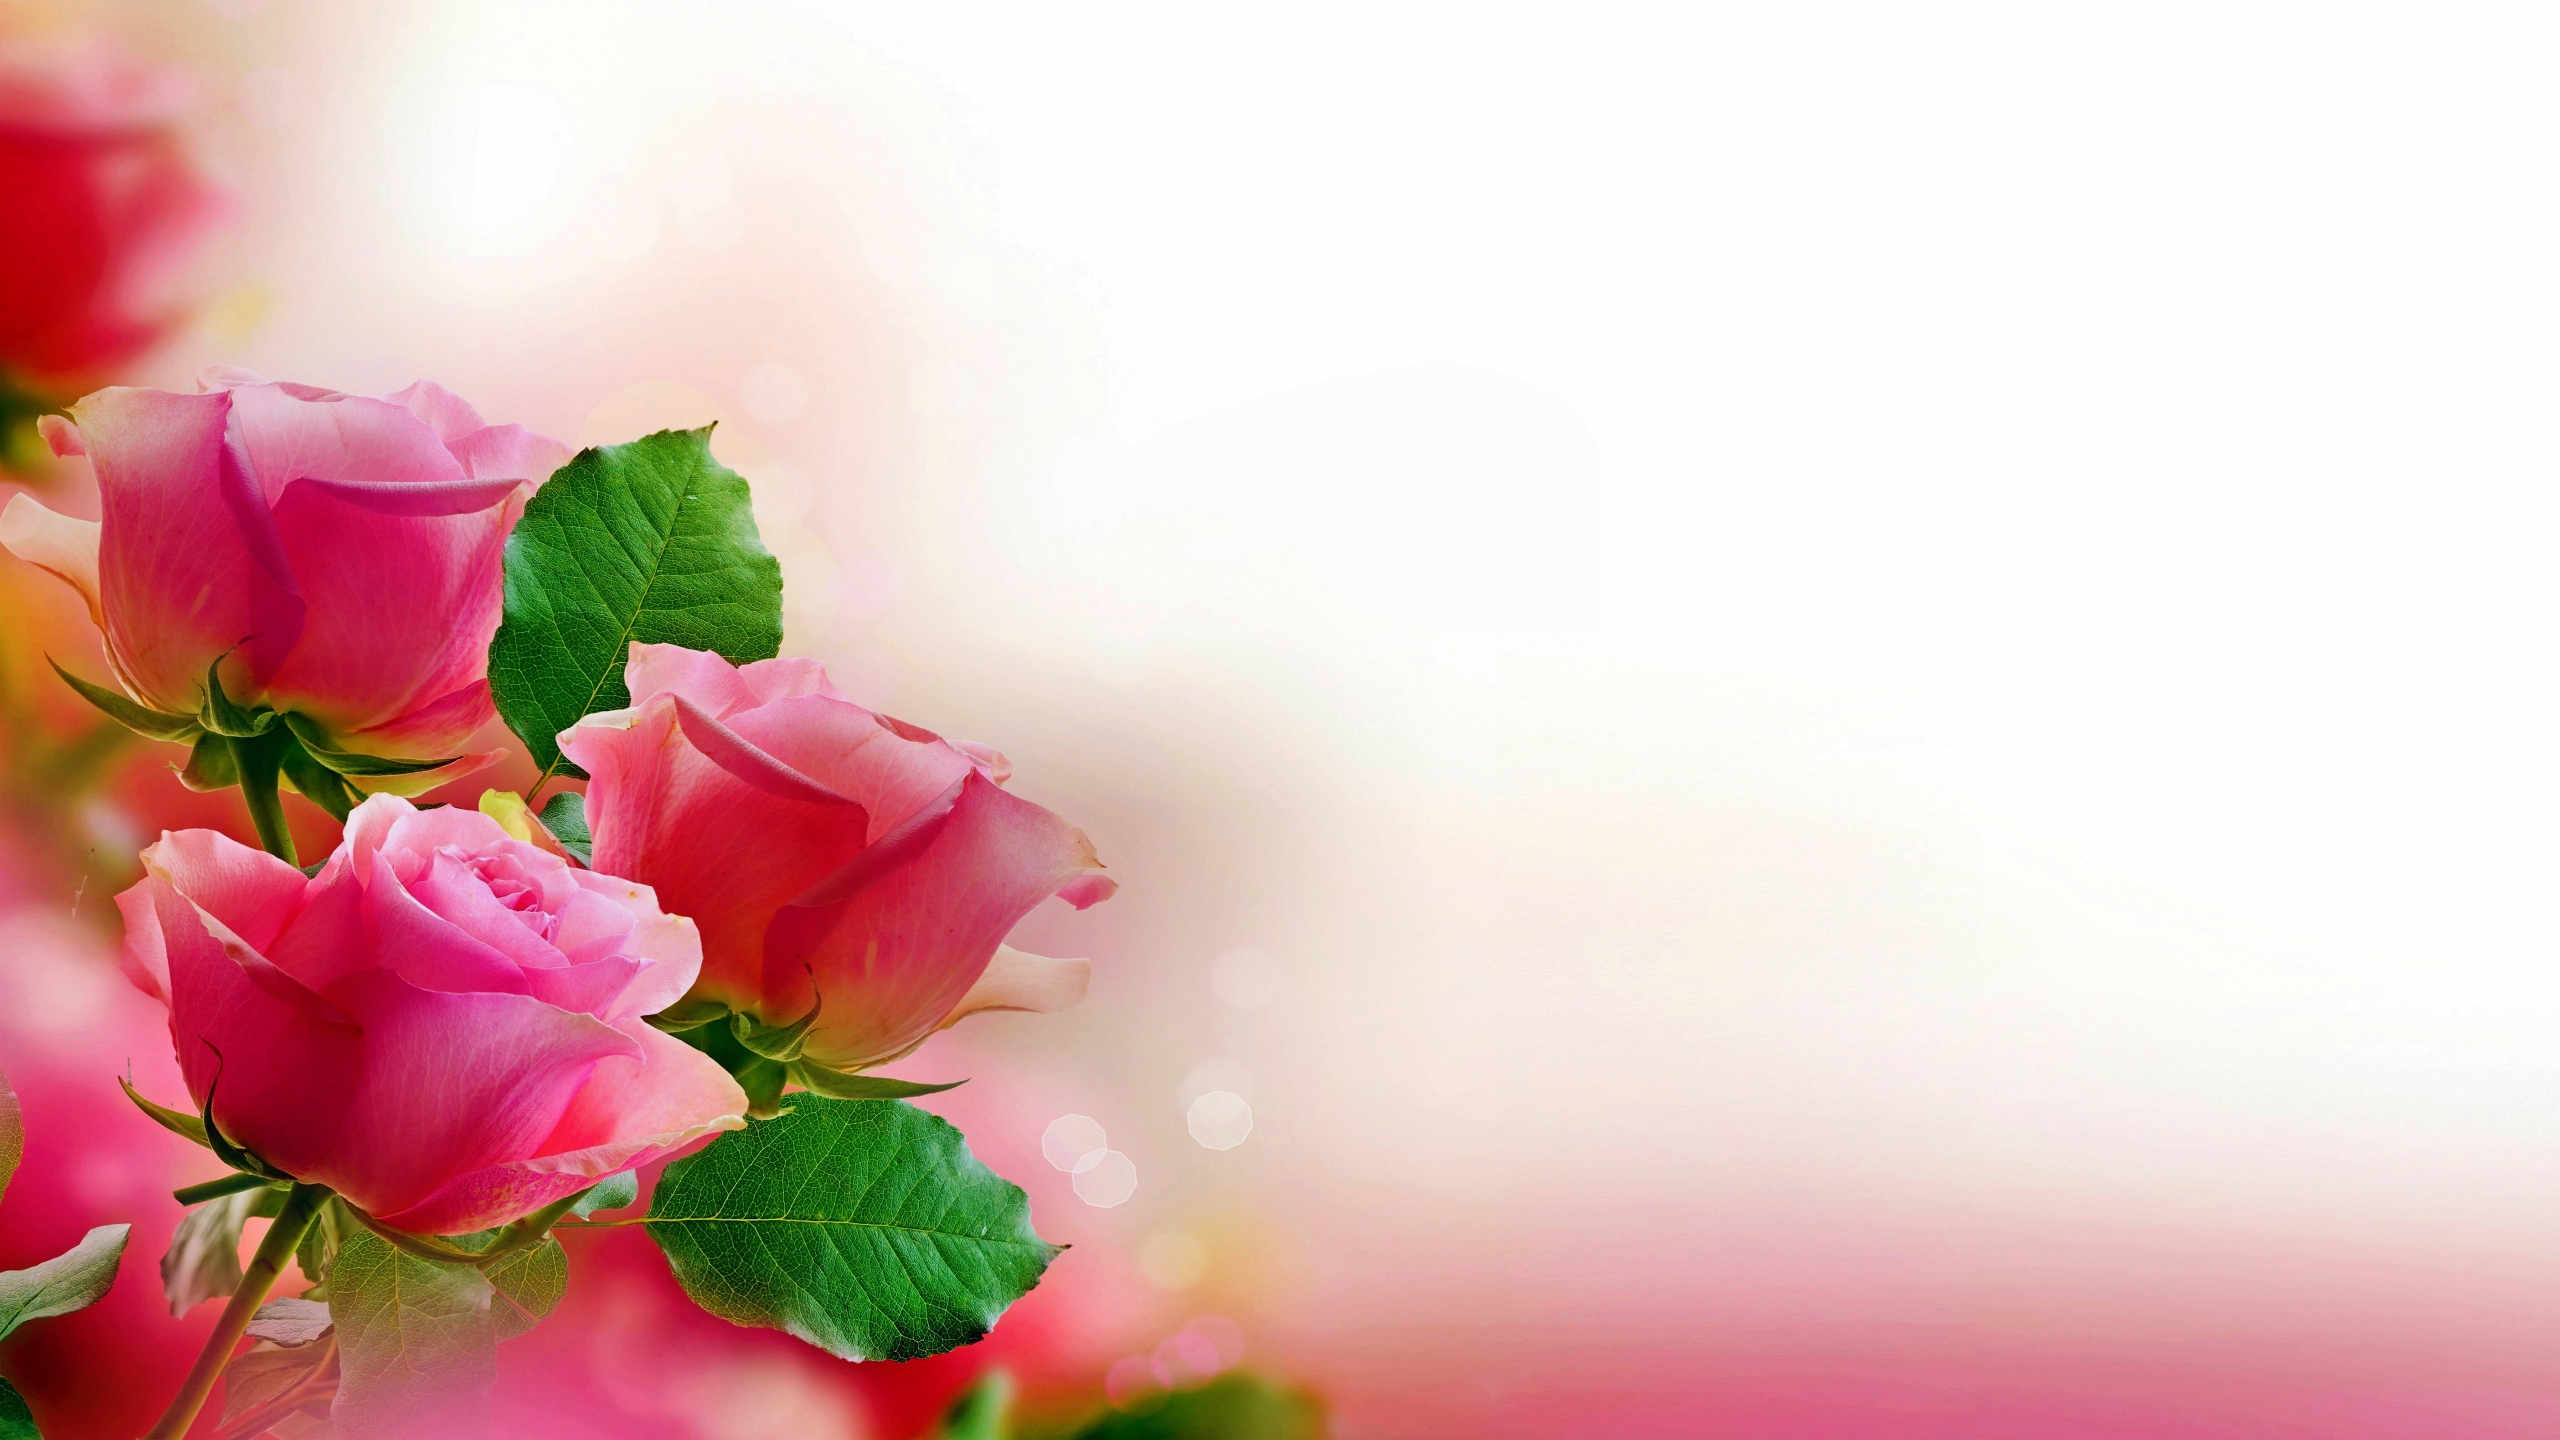 Pink Roses for 2560 x 1440 HDTV resolution